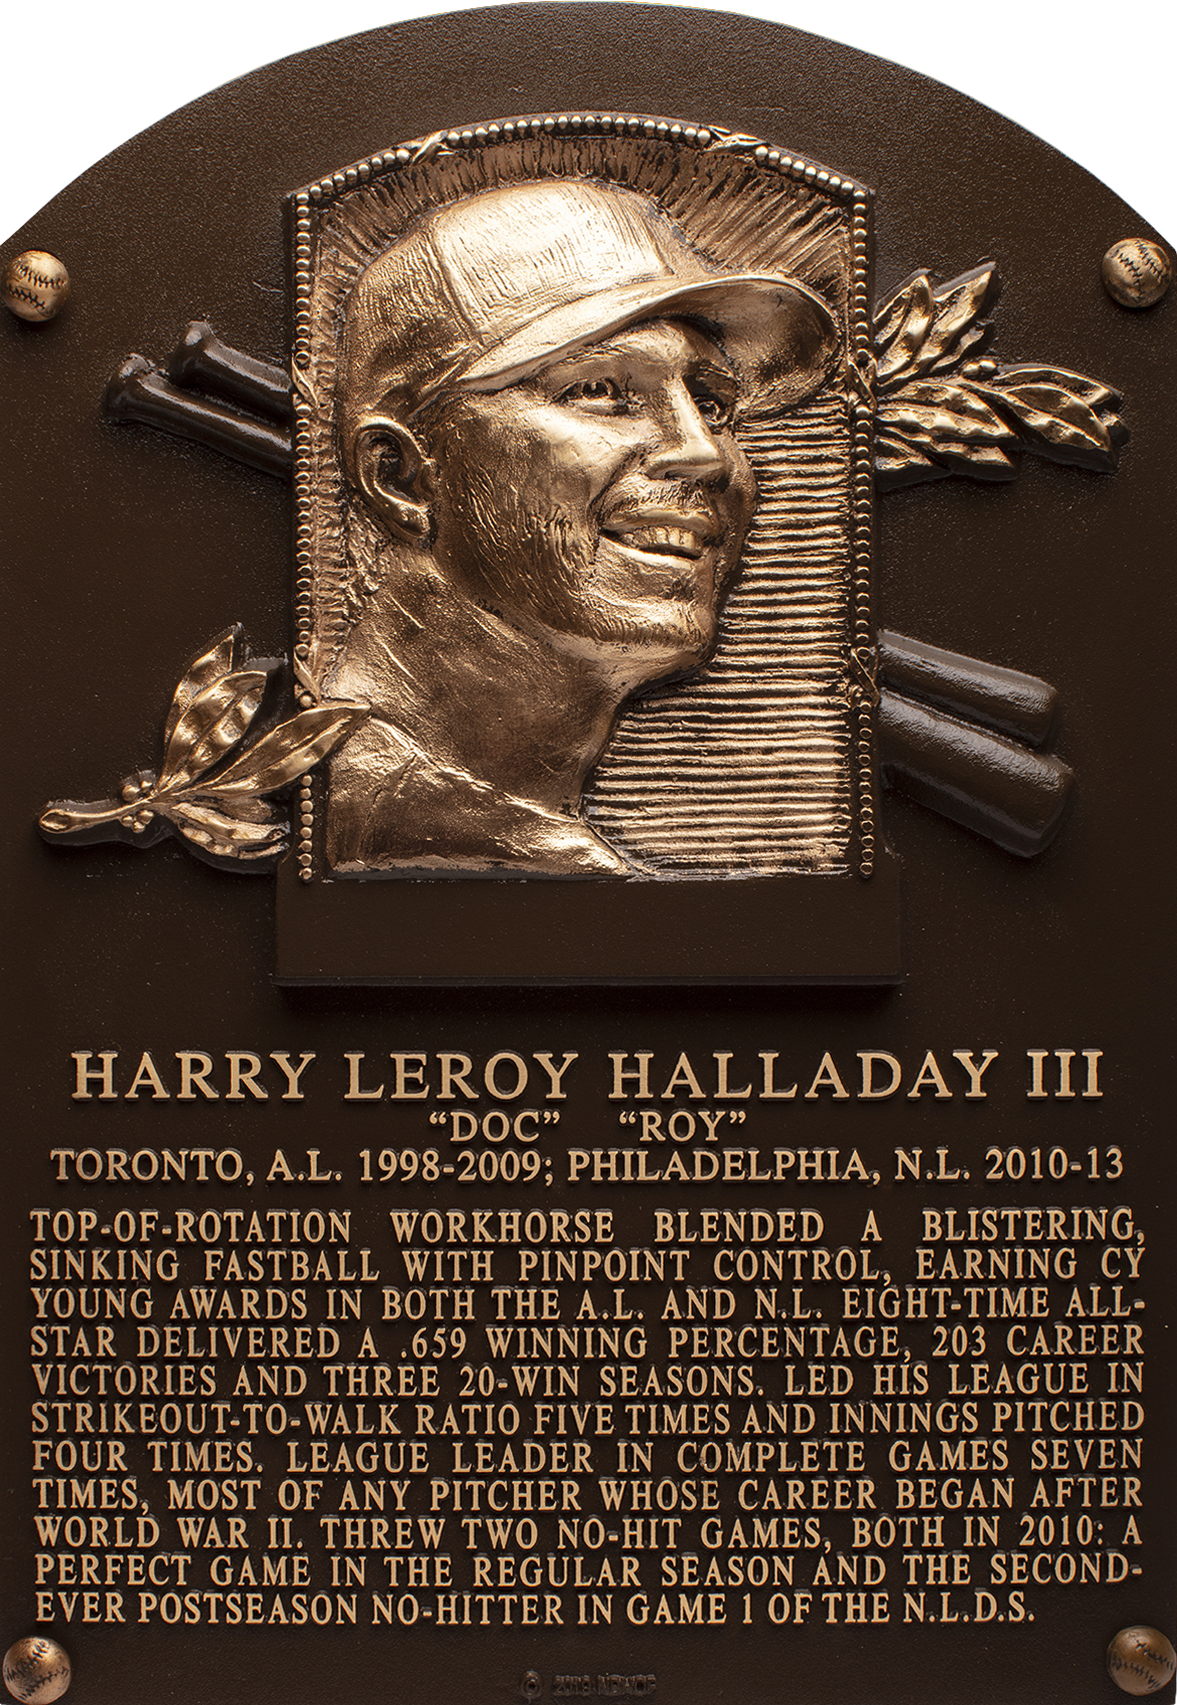 Roy Halladay Hall of Fame plaque